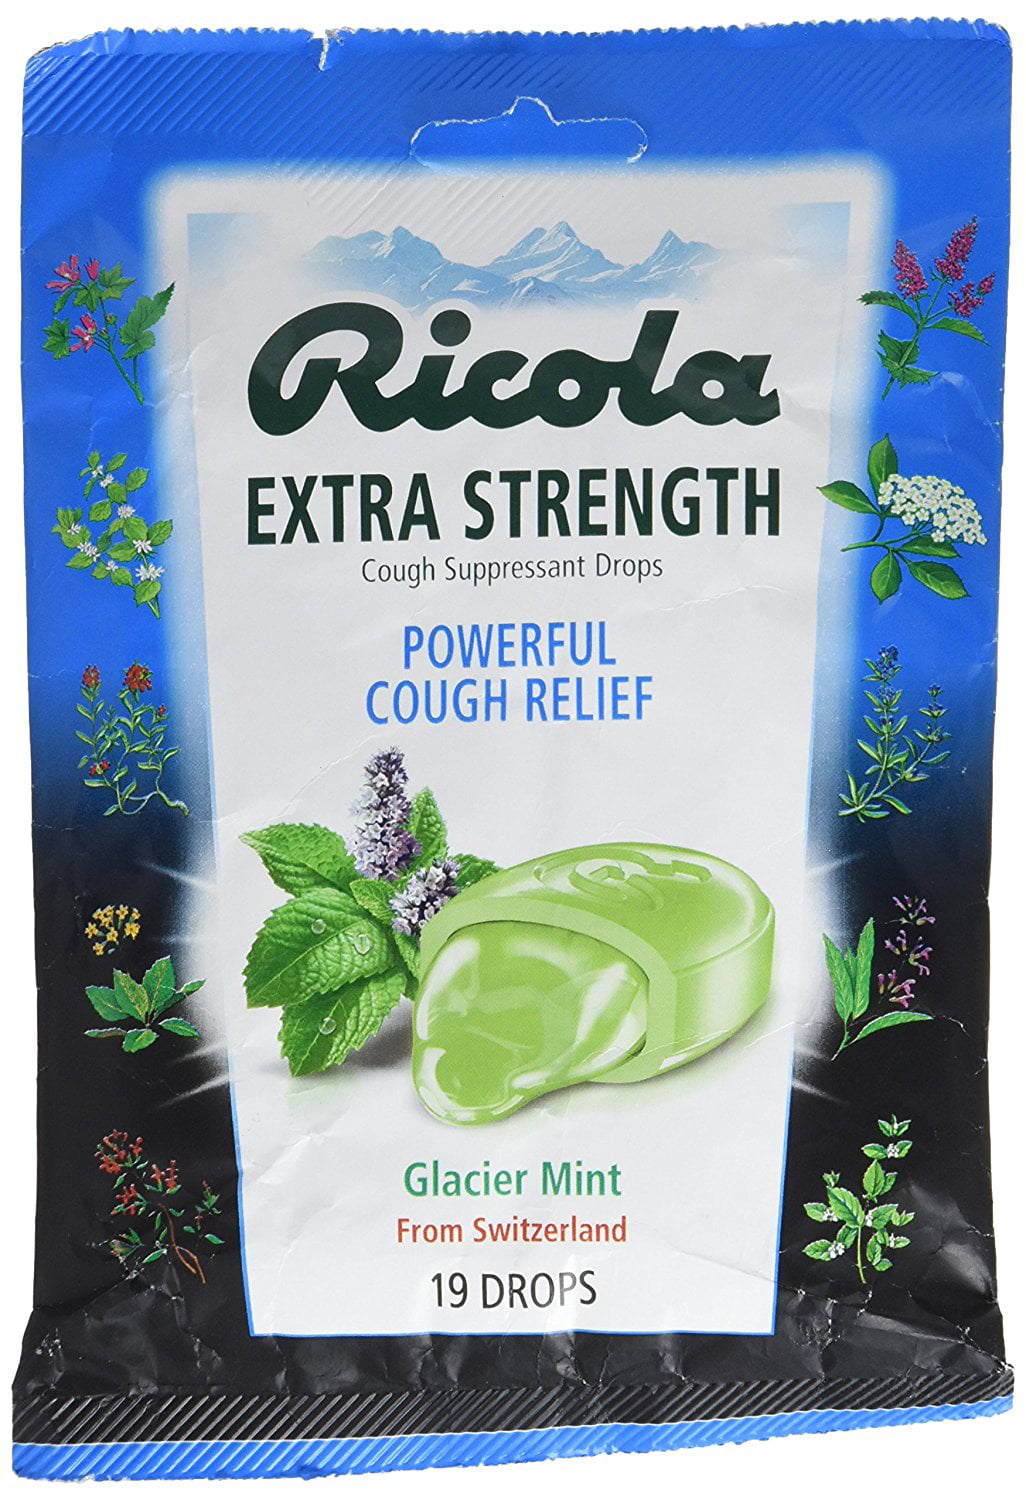 Cough Drop Extra Strength, Glacier Mint, 19 Drops (Pack of 2), Soothing